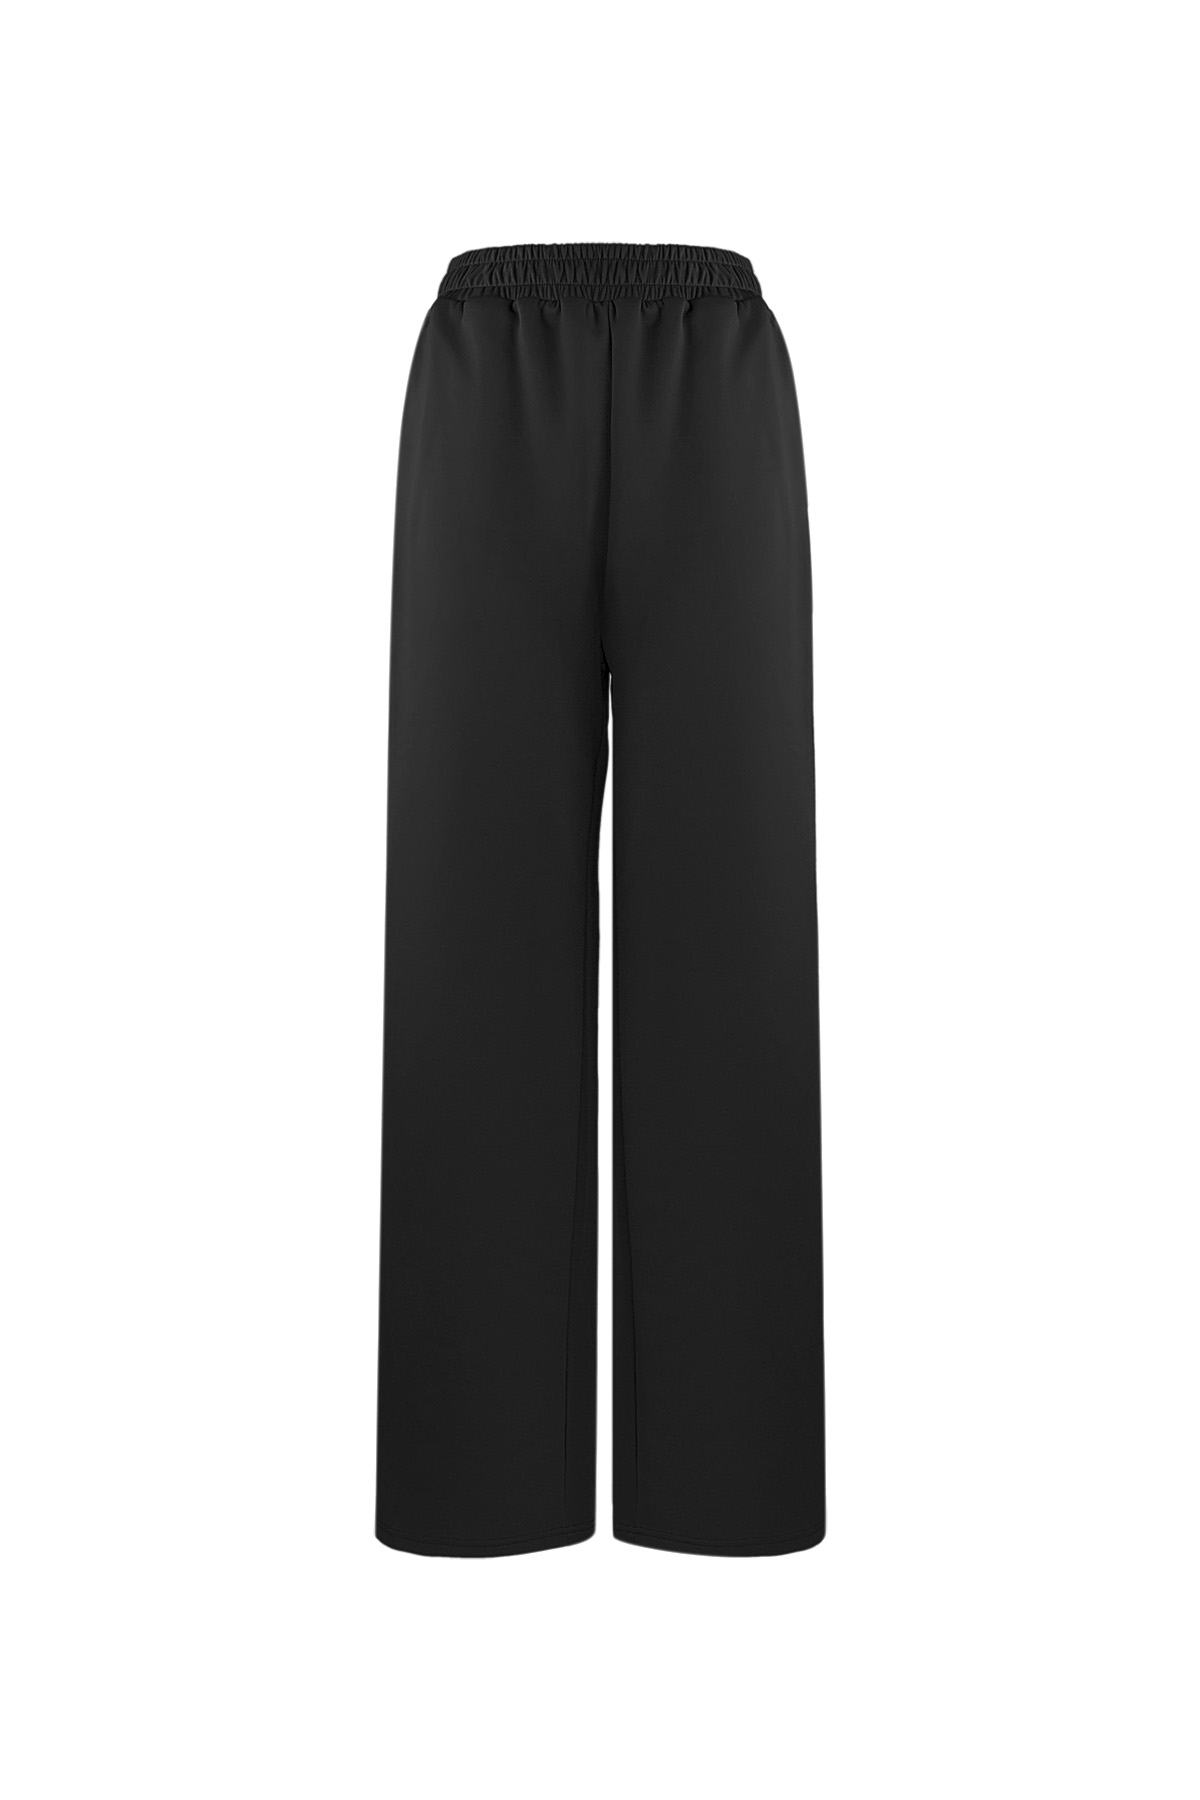 Striped must have pants - black S